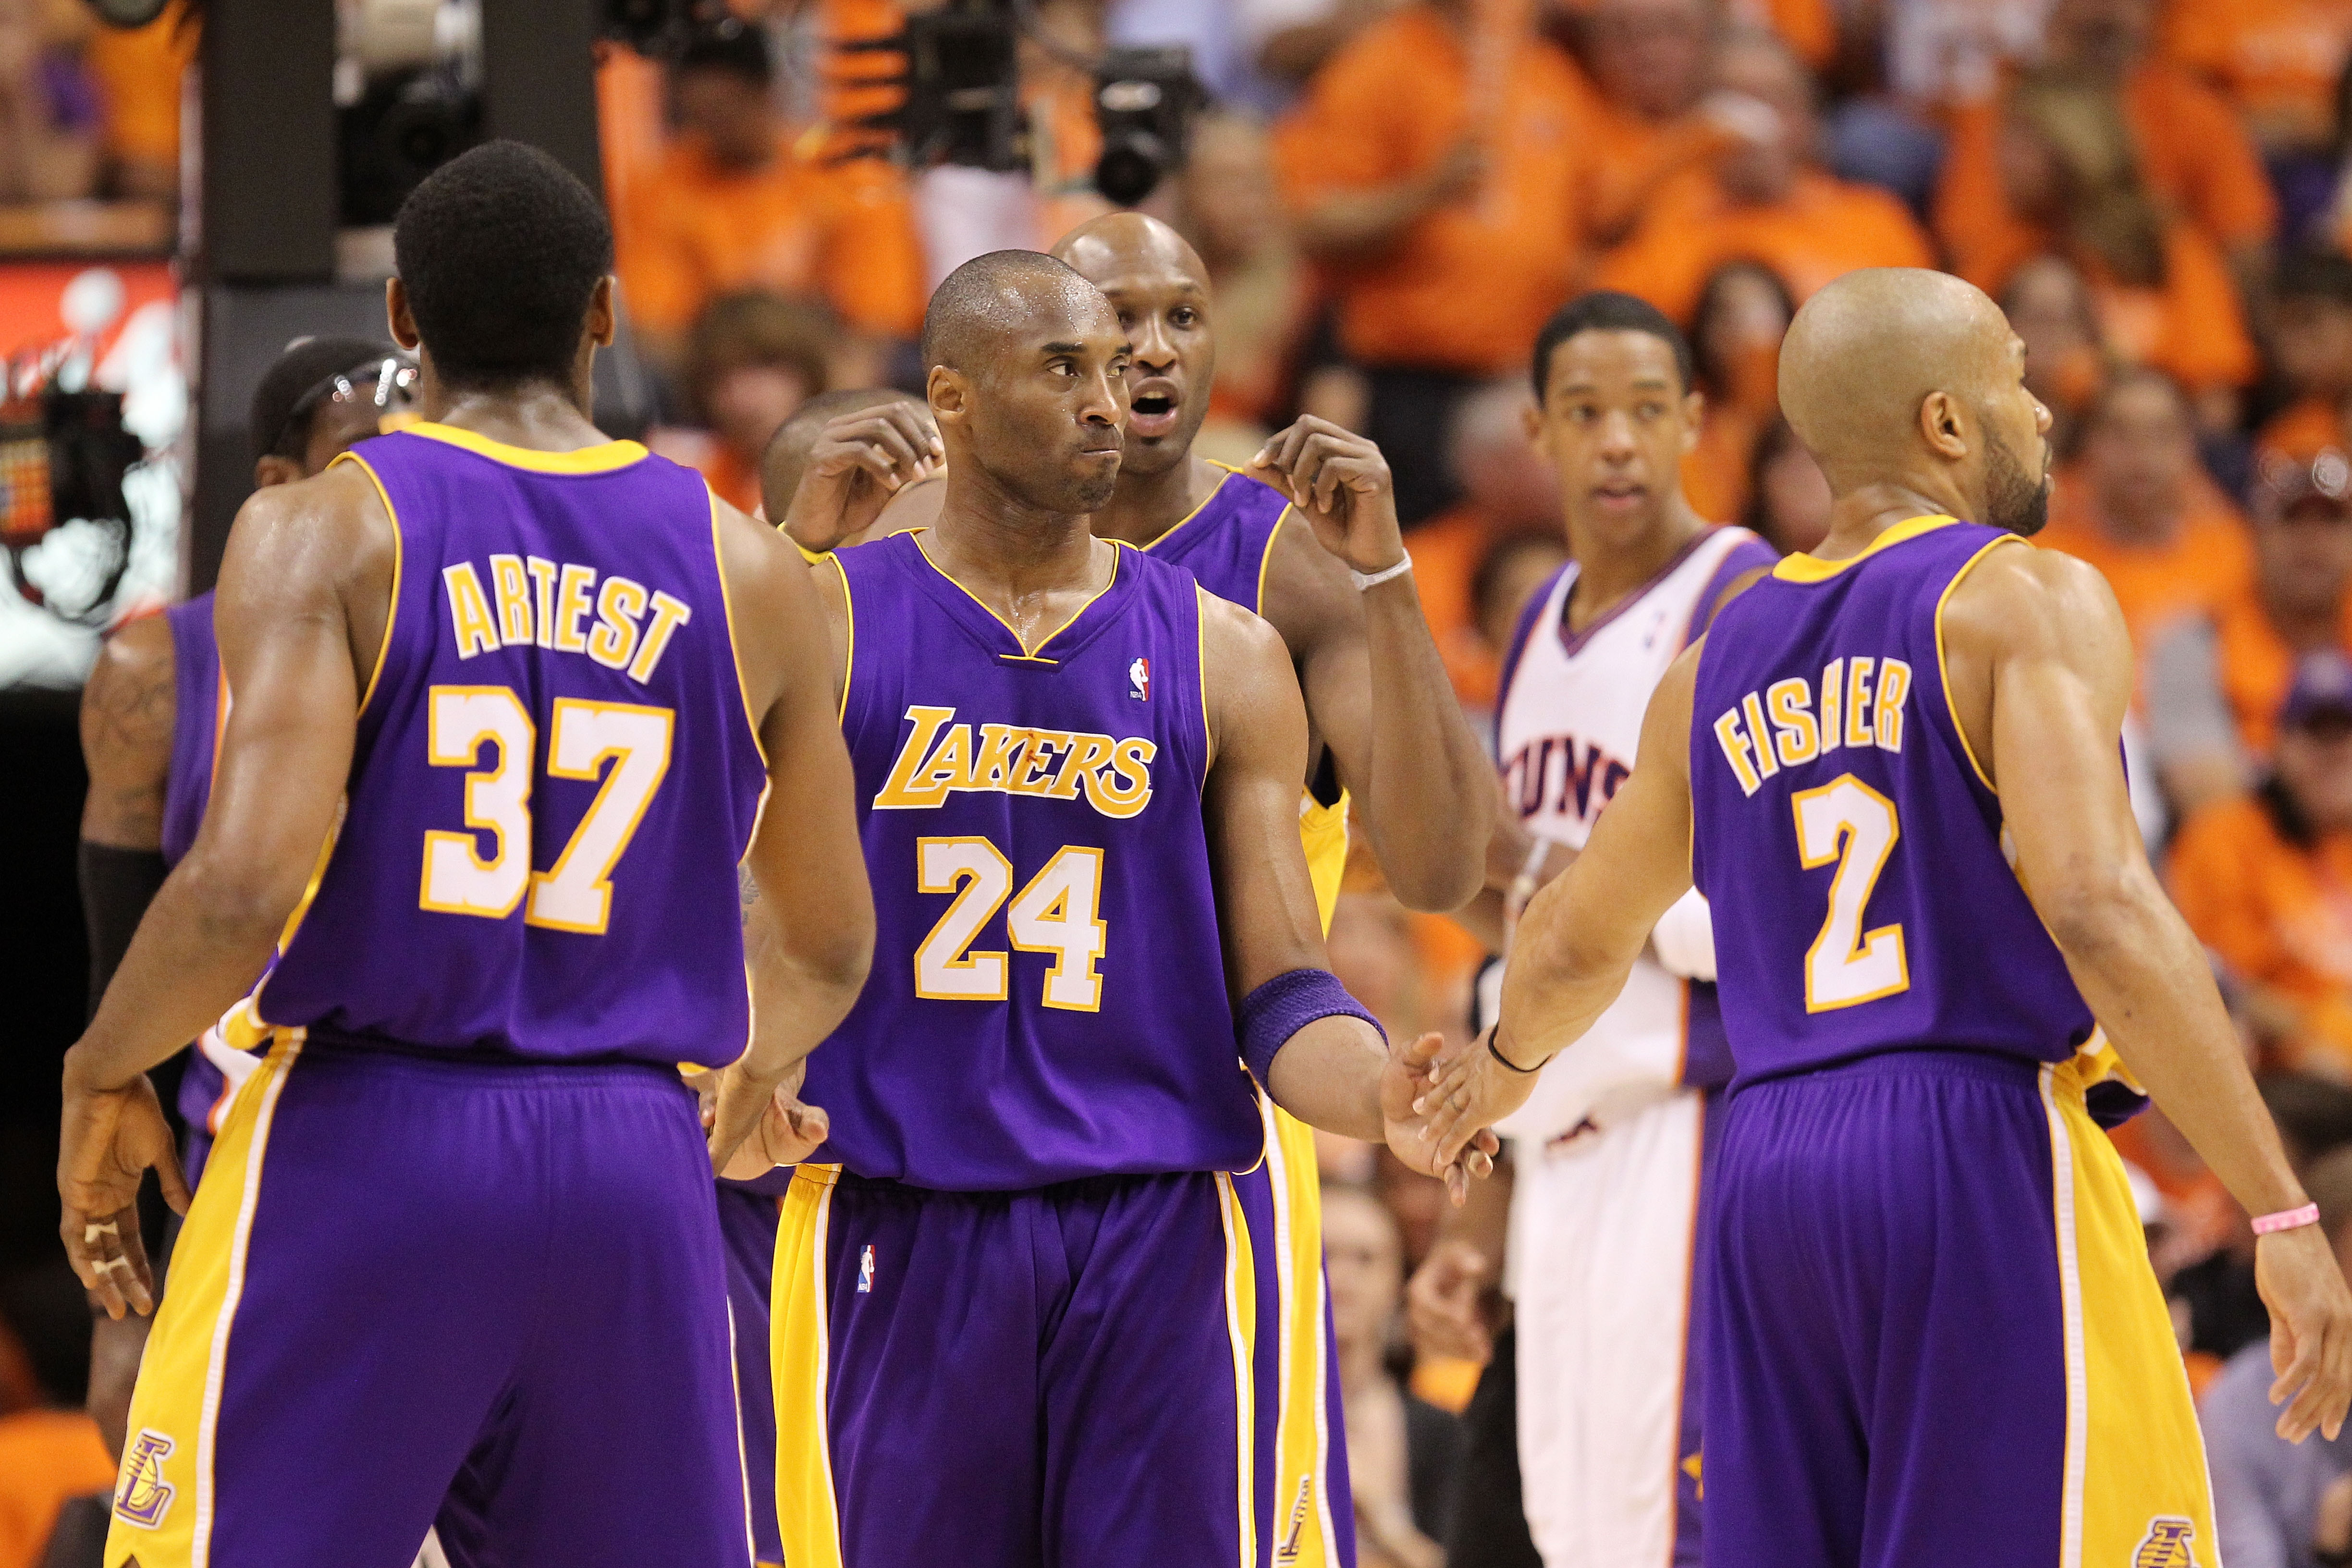 PHOENIX - MAY 29:  Ron Artest #37, Kobe Bryant #24, Lamar Odom #7 and Derek Fisher #2 of the Los Angeles Lakers celebrate a play against the Phoenix Suns in the third quarter of Game Six of the Western Conference Finals during the 2010 NBA Playoffs at US